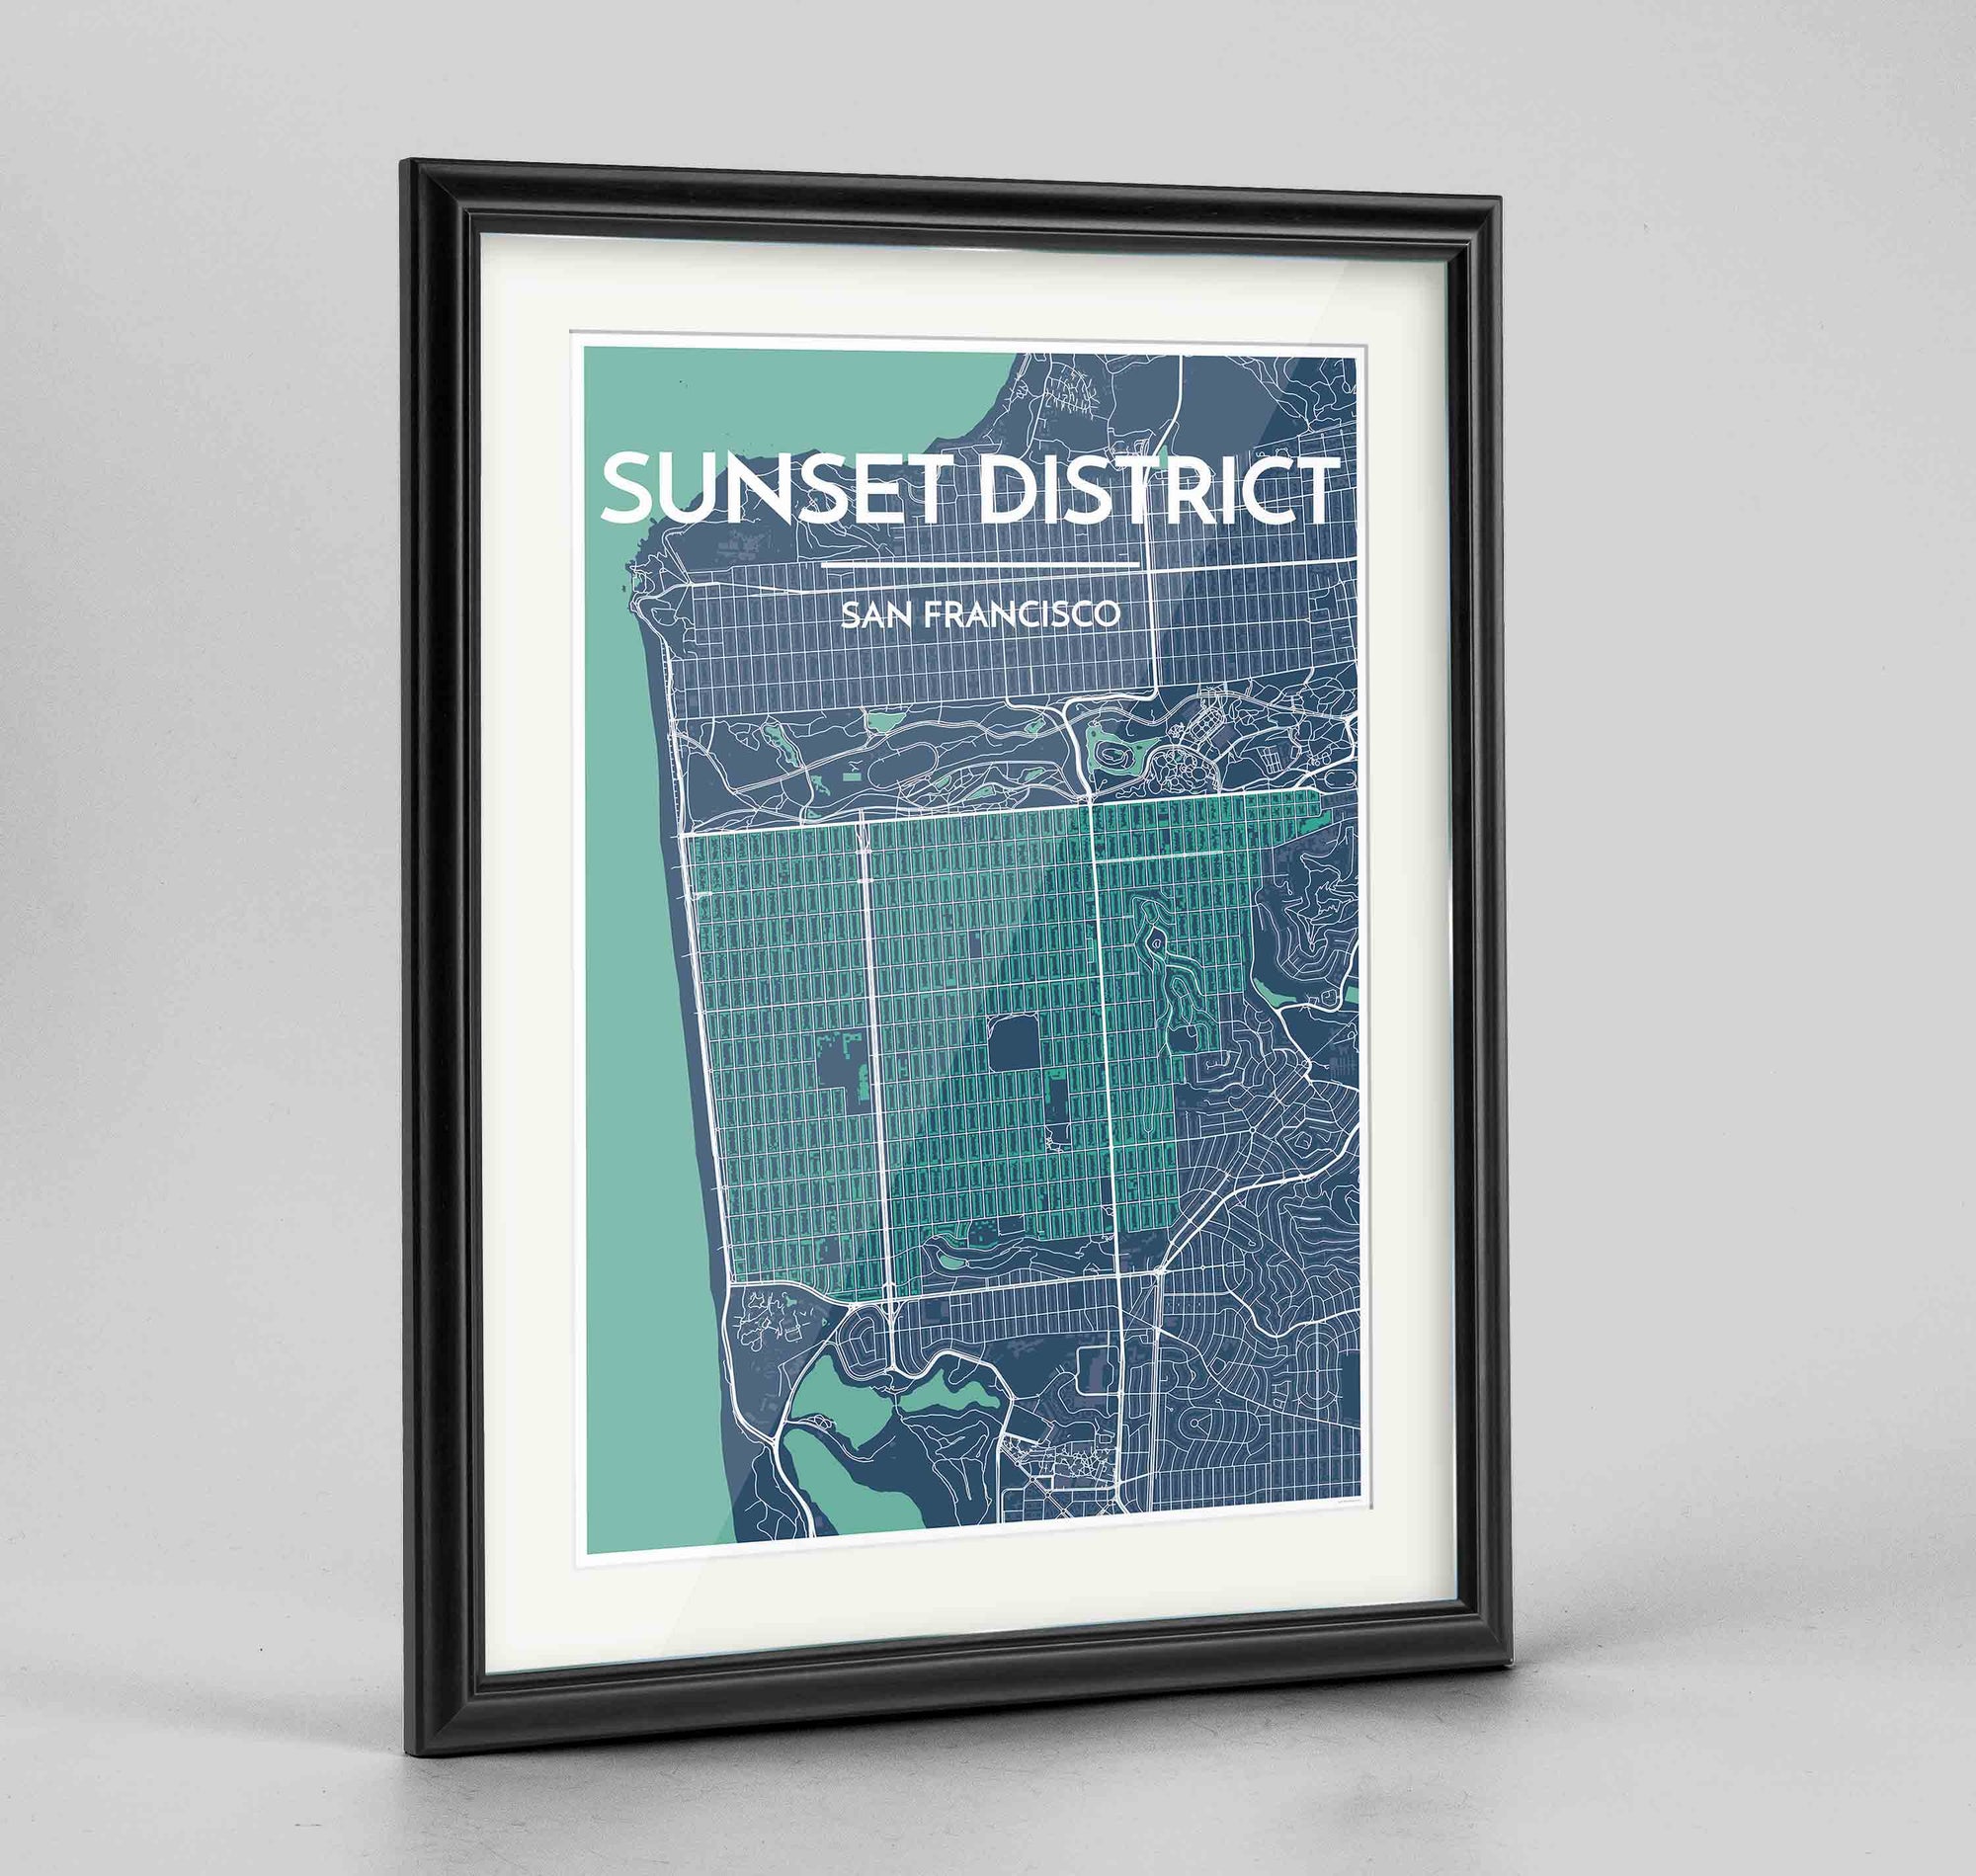 Framed The Sunset District San Francisco Map Art Print 24x36" Traditional Black frame Point Two Design Group